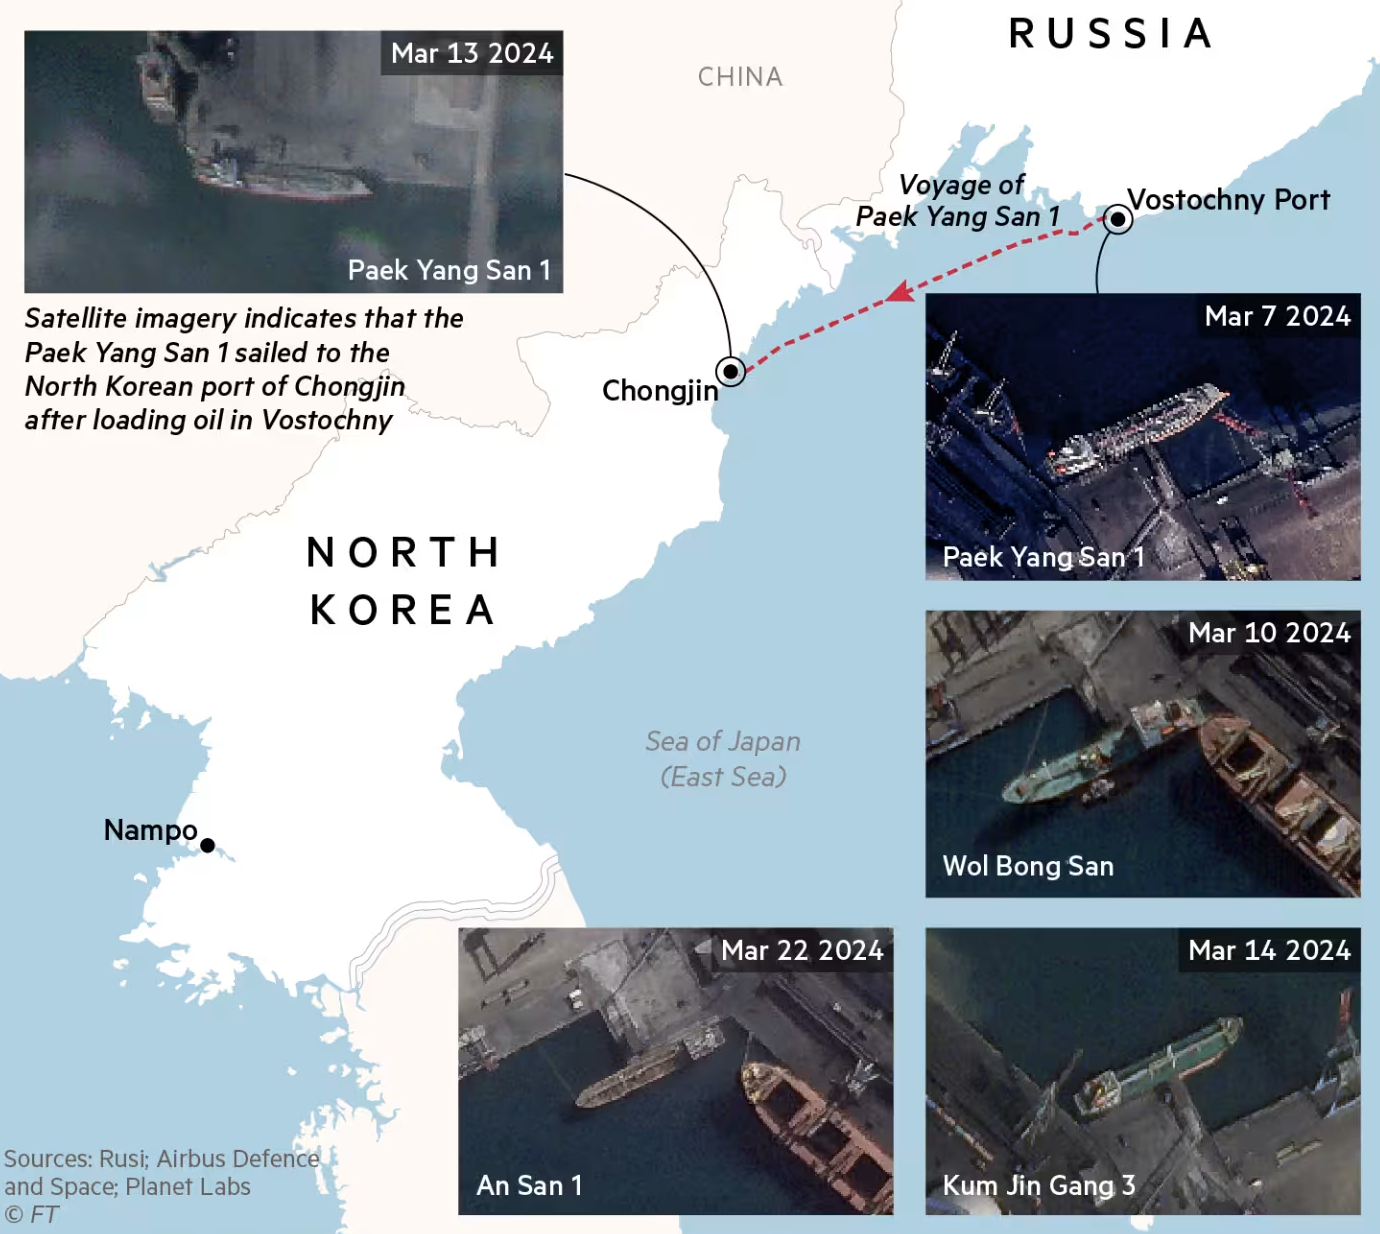 Russia supplies oil to North Korea as UN sanctions regime nears ‘collapse’